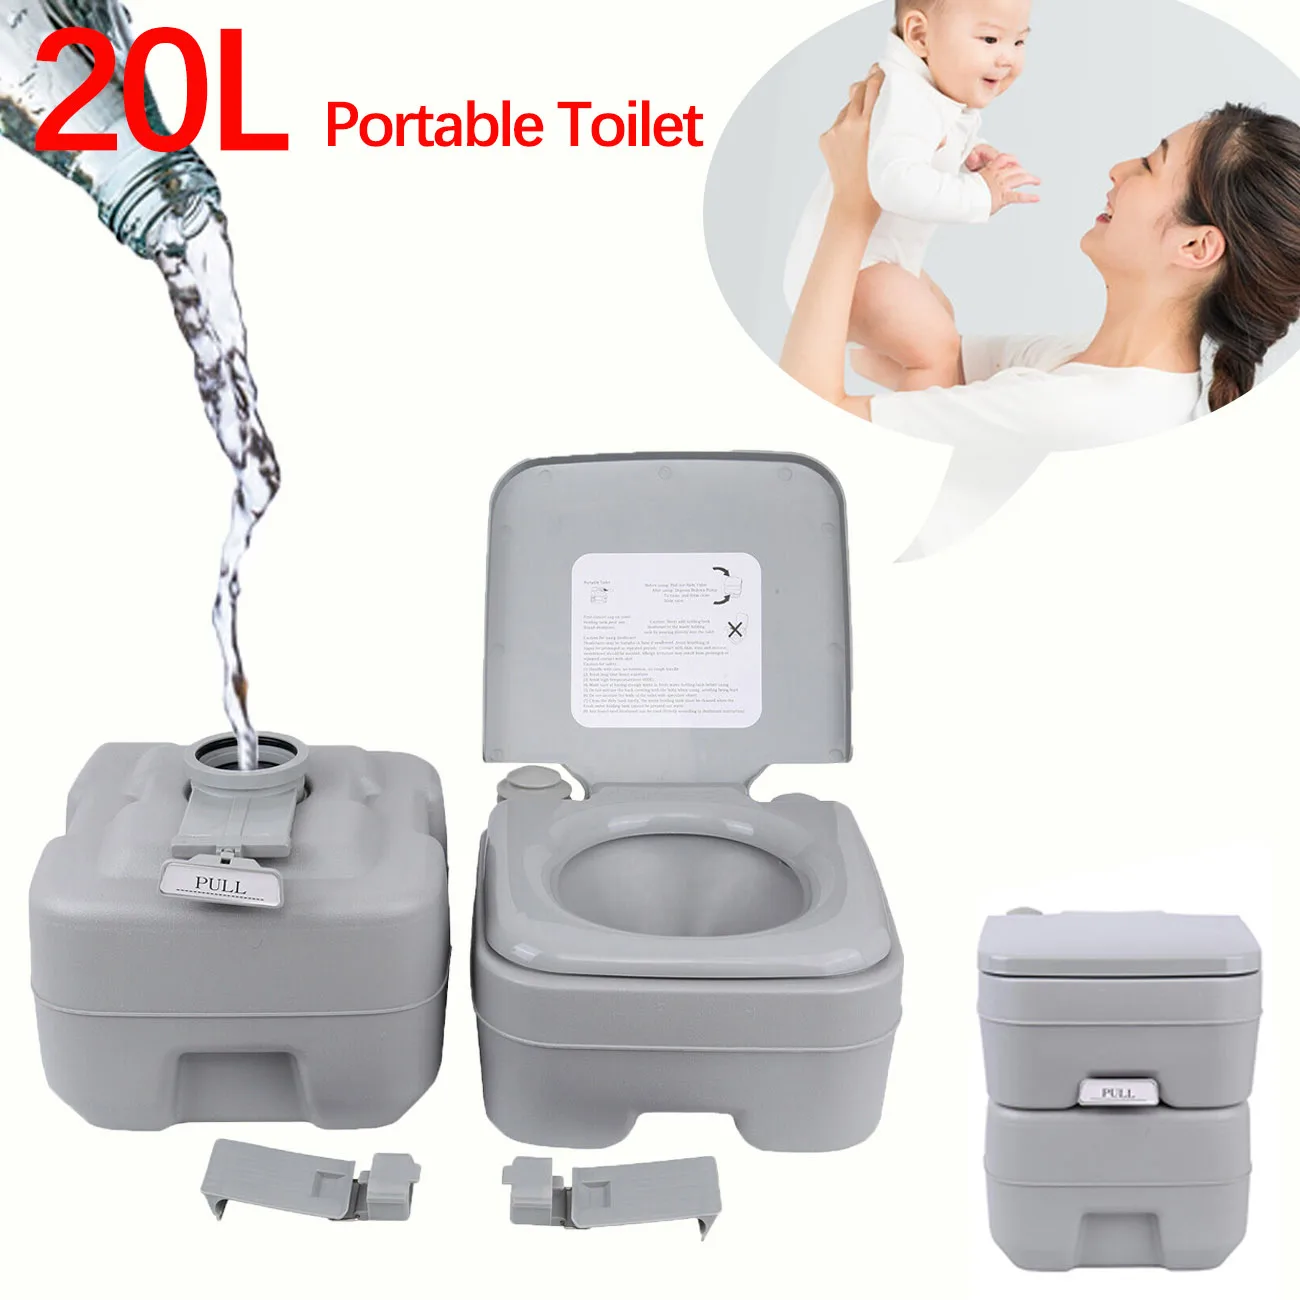 Honhill 20L Portable Toilet Adult Children Mobile Toilet Outdoor Camping For Home Hospital Travel Boats Bus Chemical WC